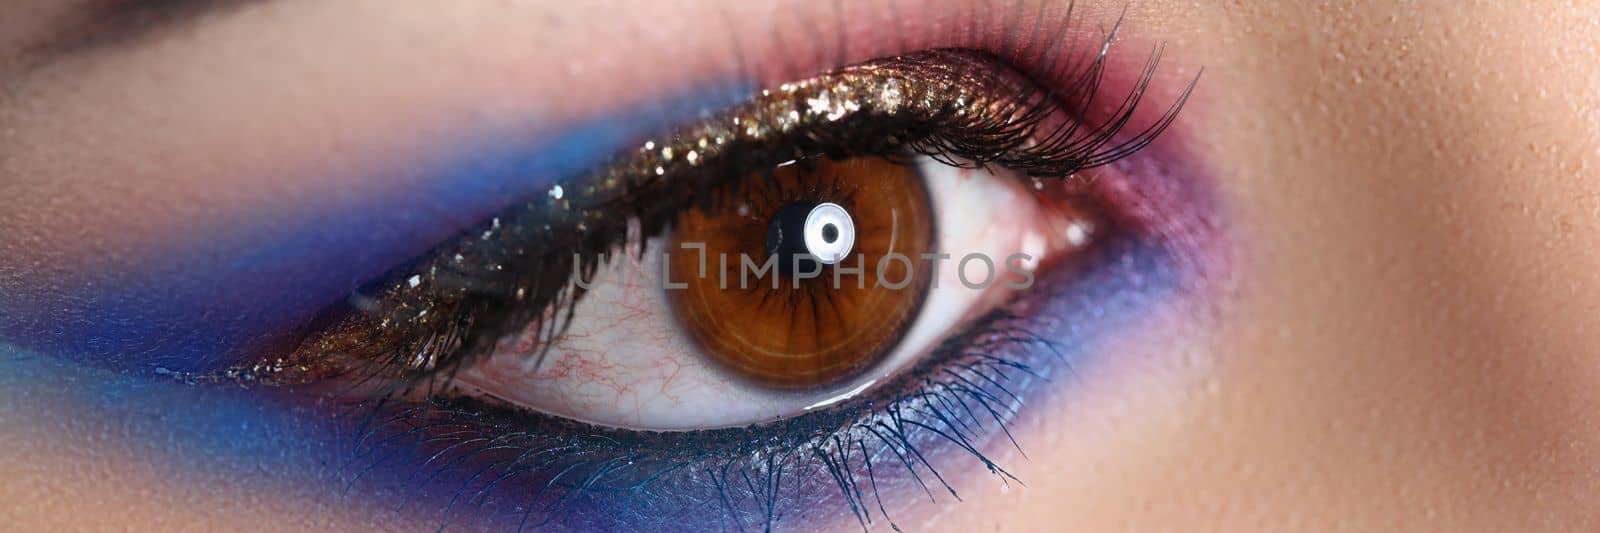 Closeup of brown female eye with beautiful brown red and orange tints smoky eye makeup. Bright evening makeup